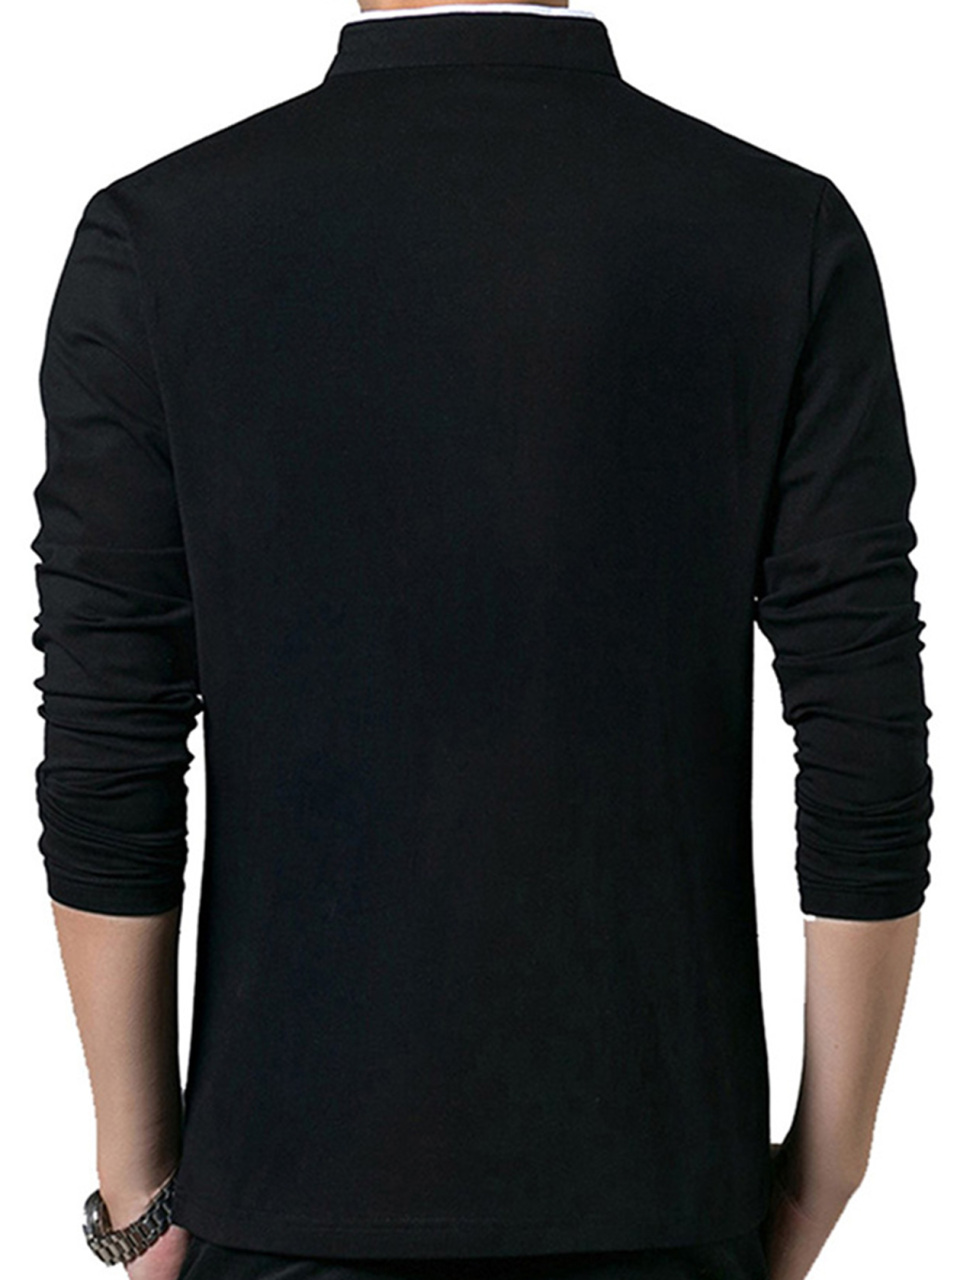 Solid Long Sleeve Large Men's T-Shirt